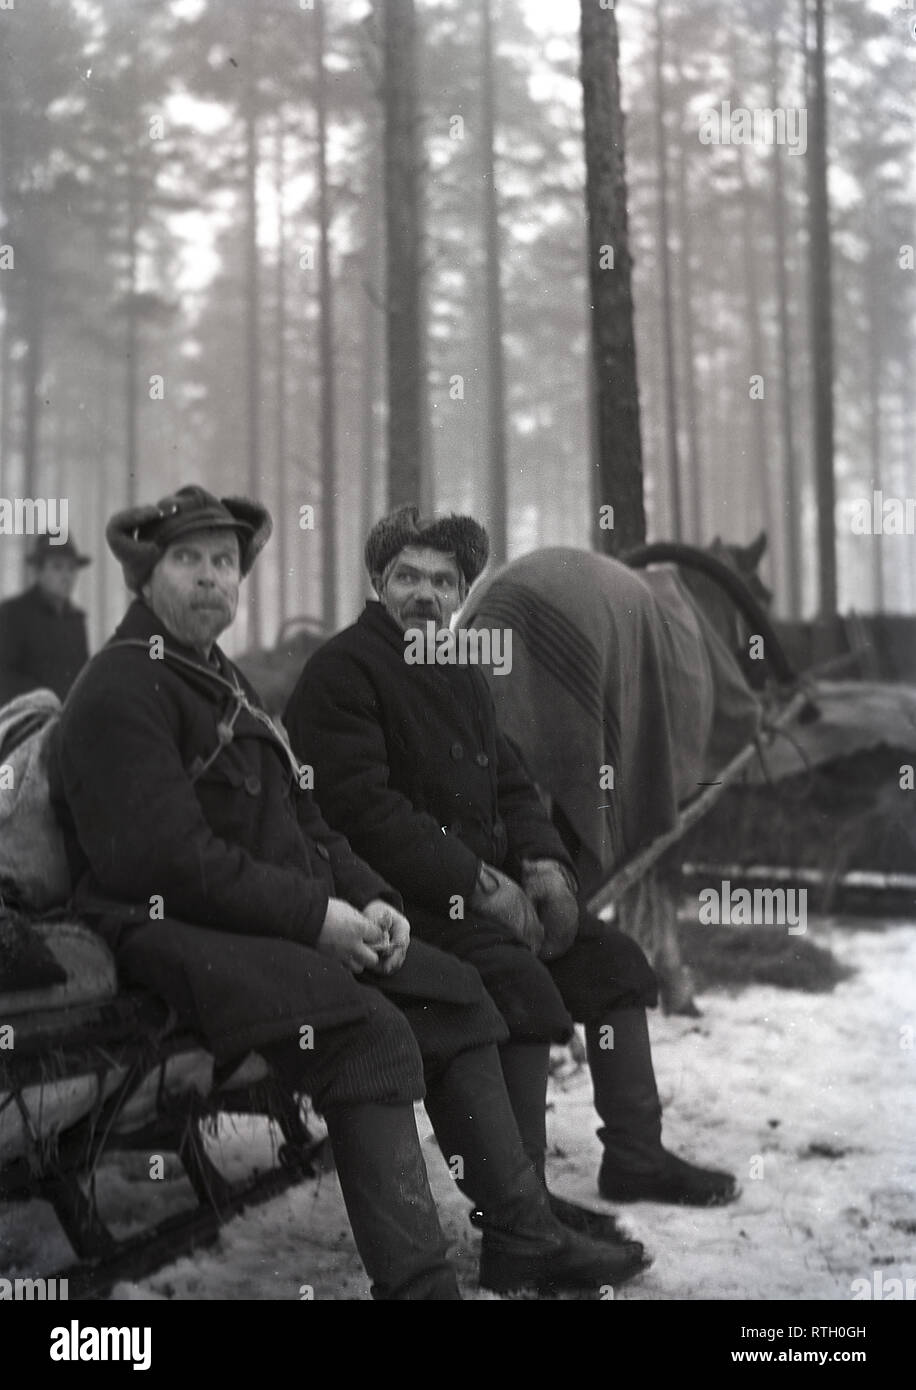 The Winter War. A military conflict between the Soviet union and Finland. It began with a Soviet invasion on november 1939 when Soviet infantery crossed the border on the Karelian Isthmus. About 9500 Swedish volunteer soldiers participated in the war. Here at Karelian Isthmus Finland  Finnish civilians evacuated from the frontline are resting on a horse drawn sledge. December 1939. Photo Kristoffersson ref 98-10. Stock Photo